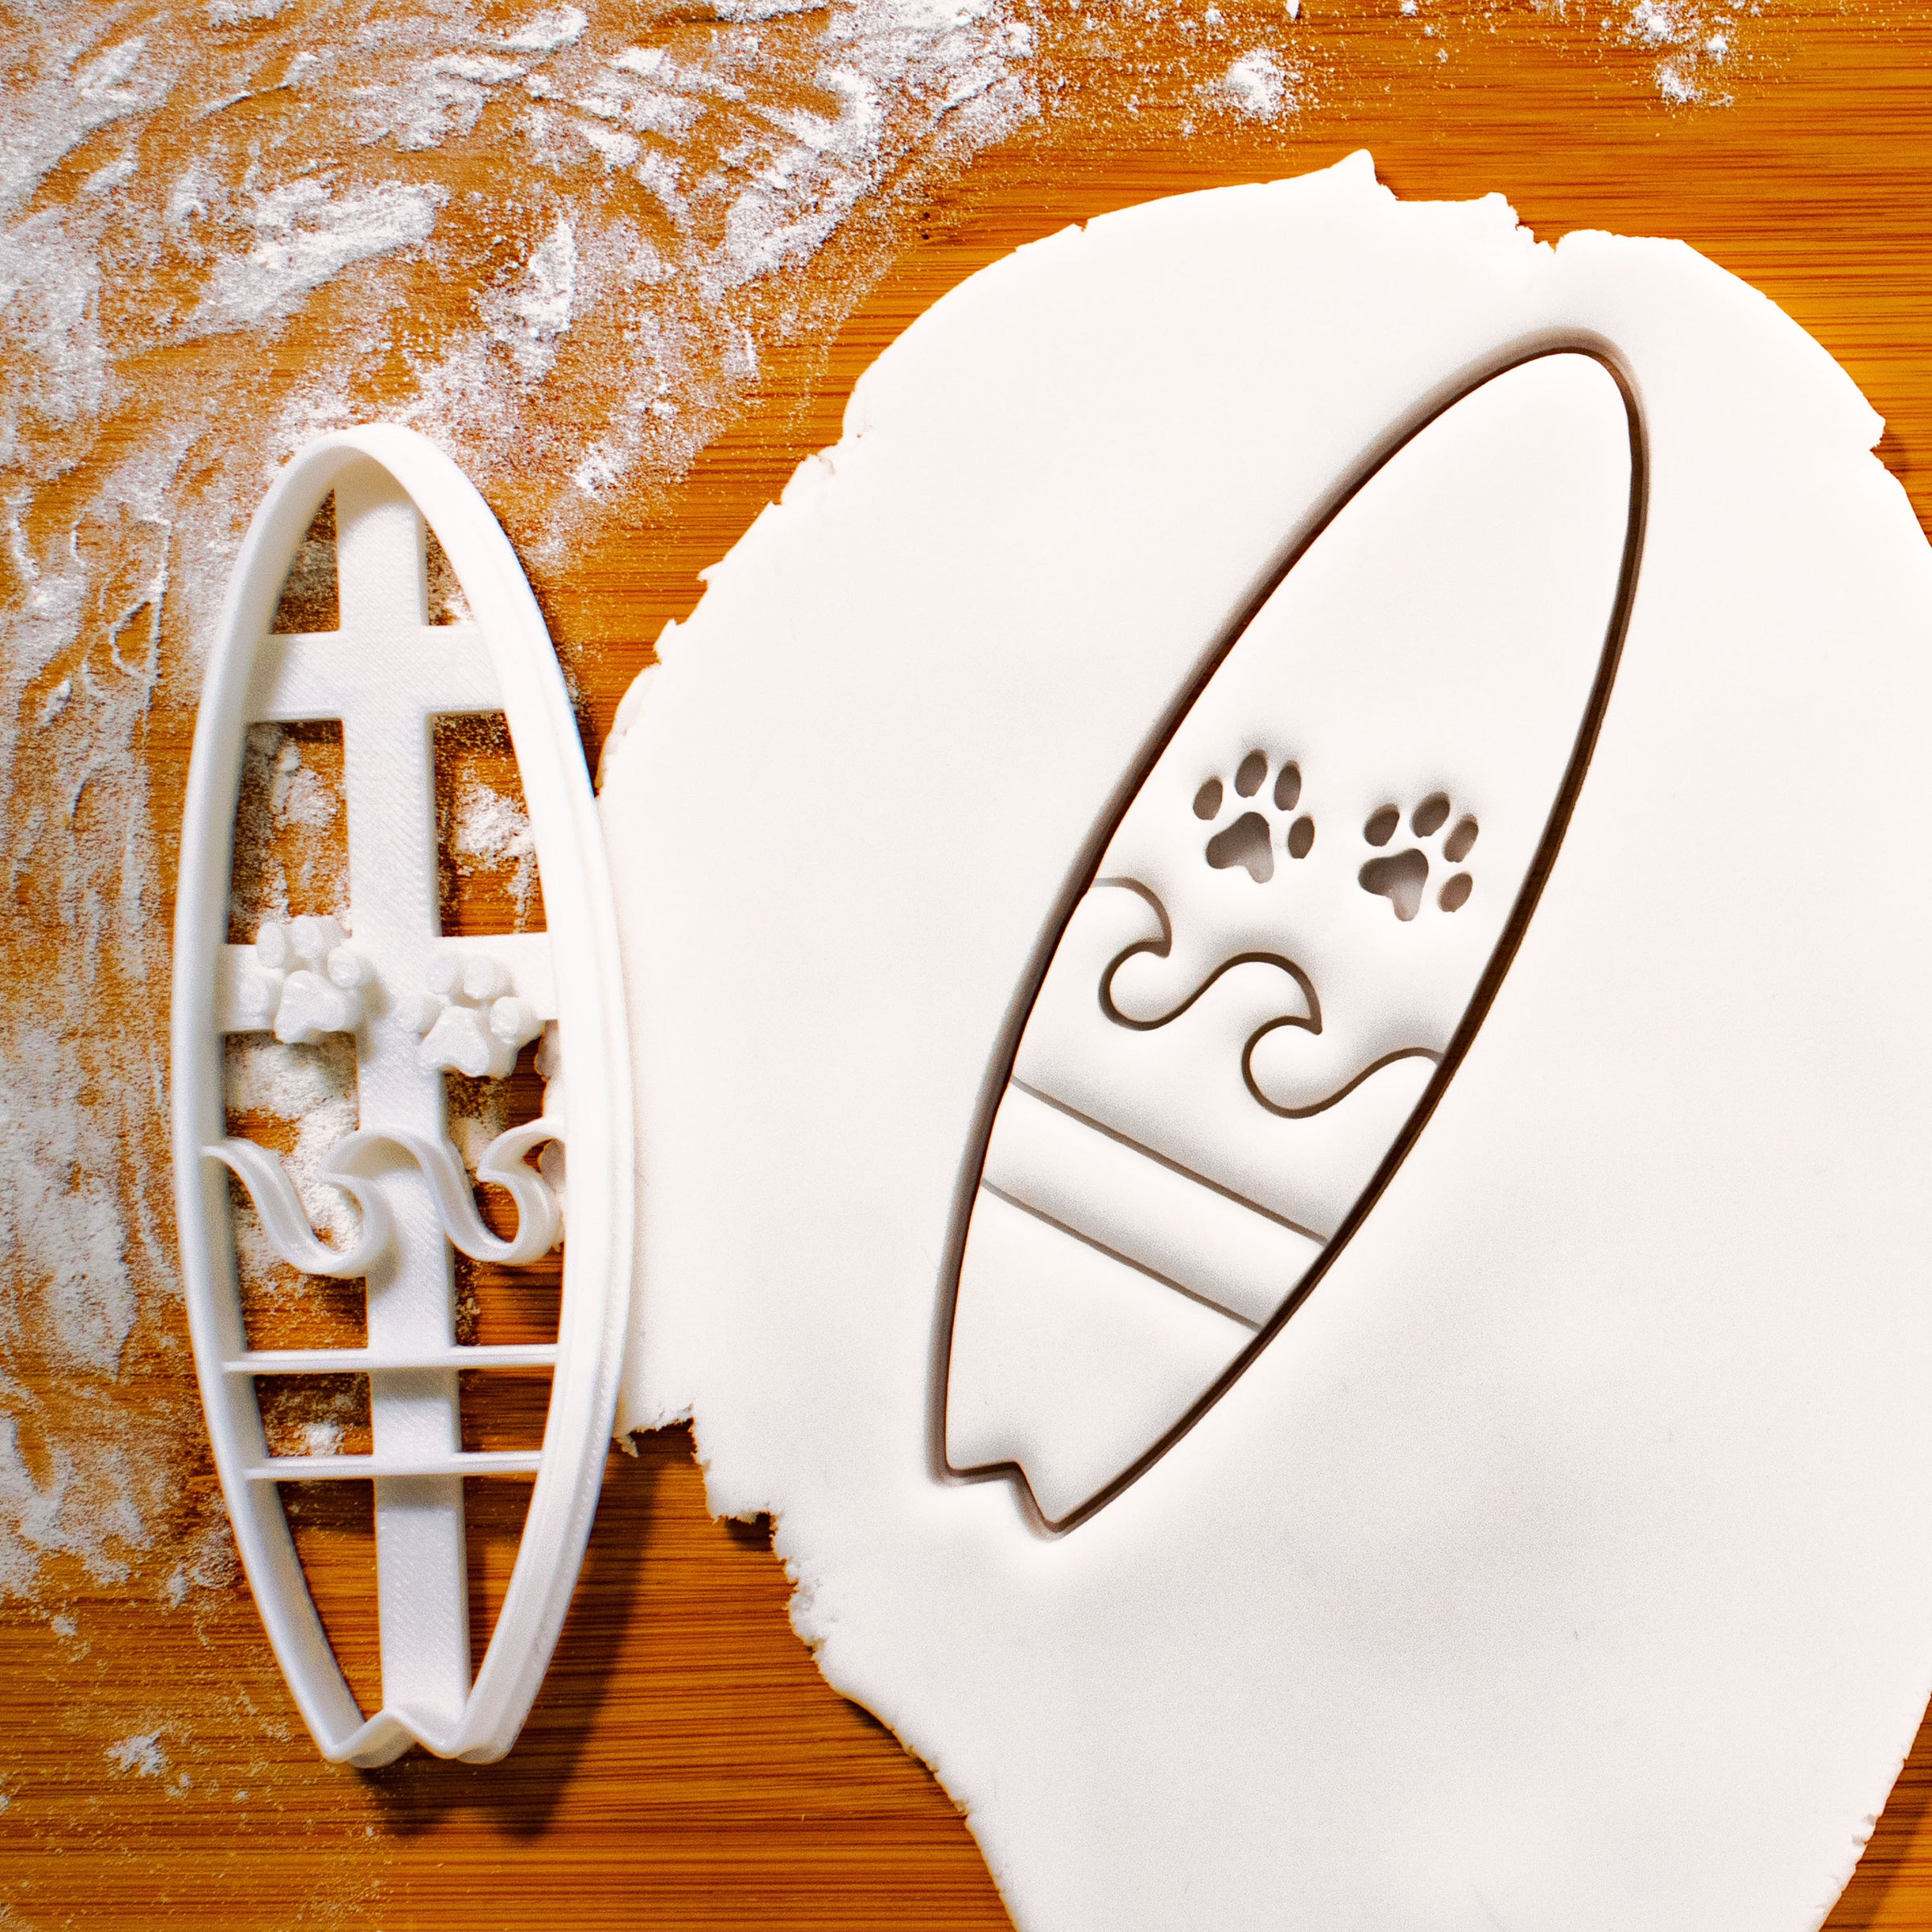 surfboard with paw prints cookie cutter